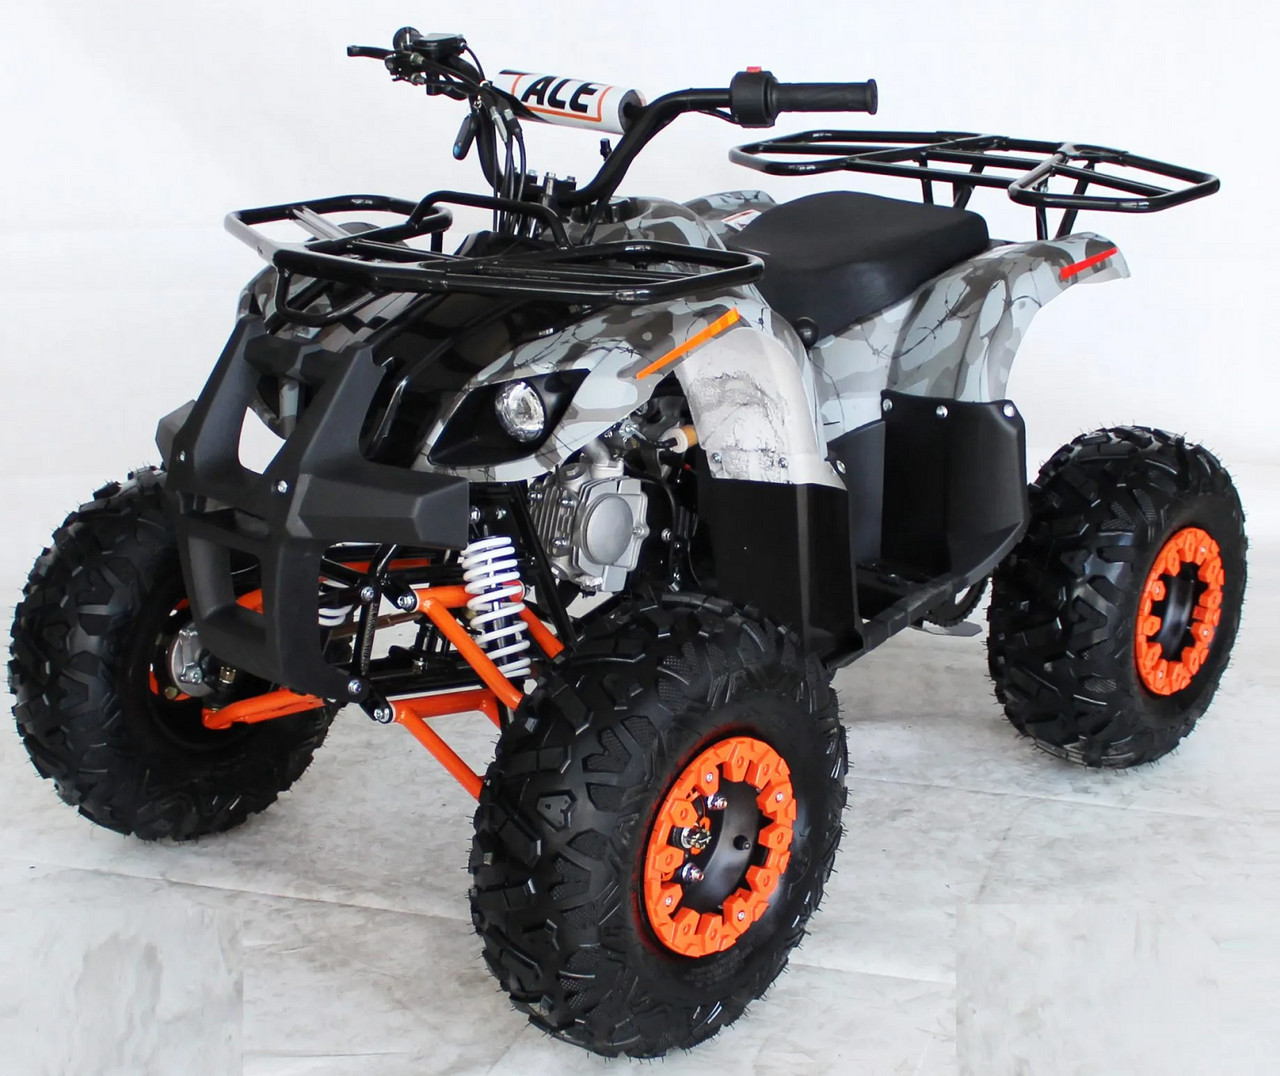 Trailmaster B125 Mid Size Utility Style Youth Atv, Electric Start, Automatic With Reverse, 8" Wheels